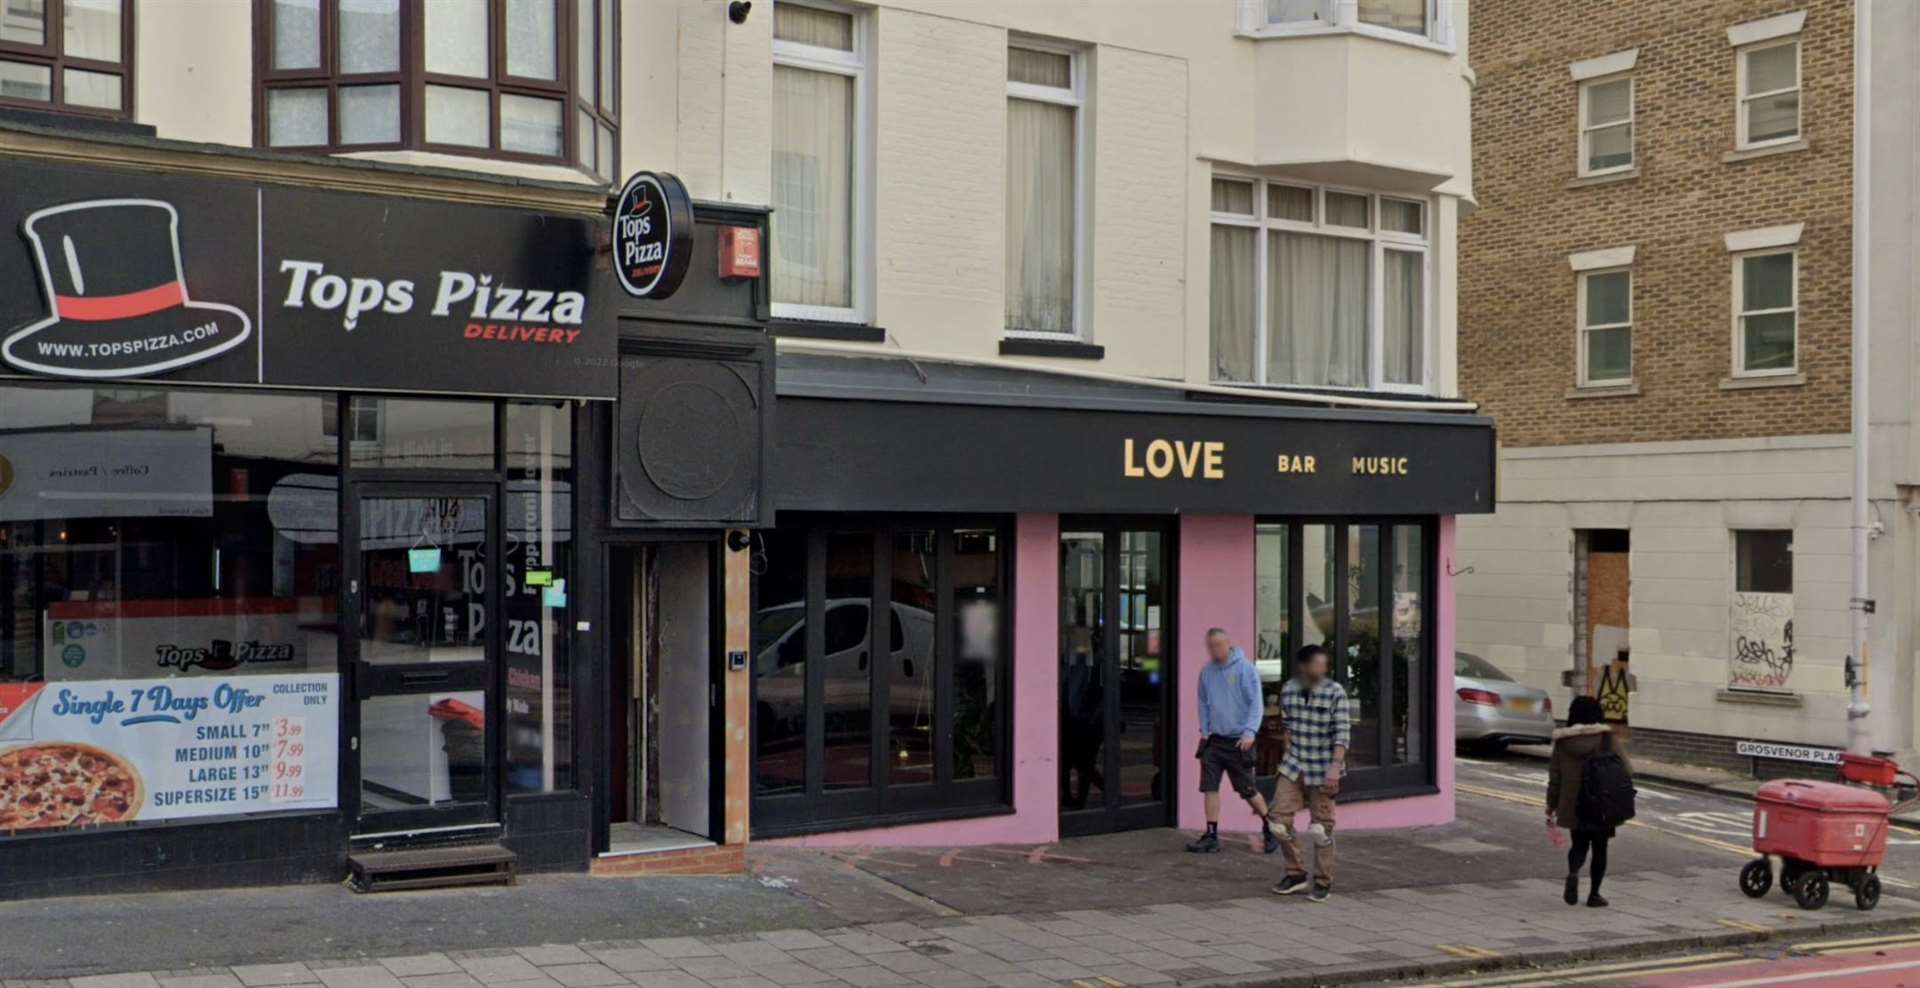 The club will be accessible via a doorway between the former Love Cafe and Tops Pizza in Marine Gardens, Margate. Picture: Google